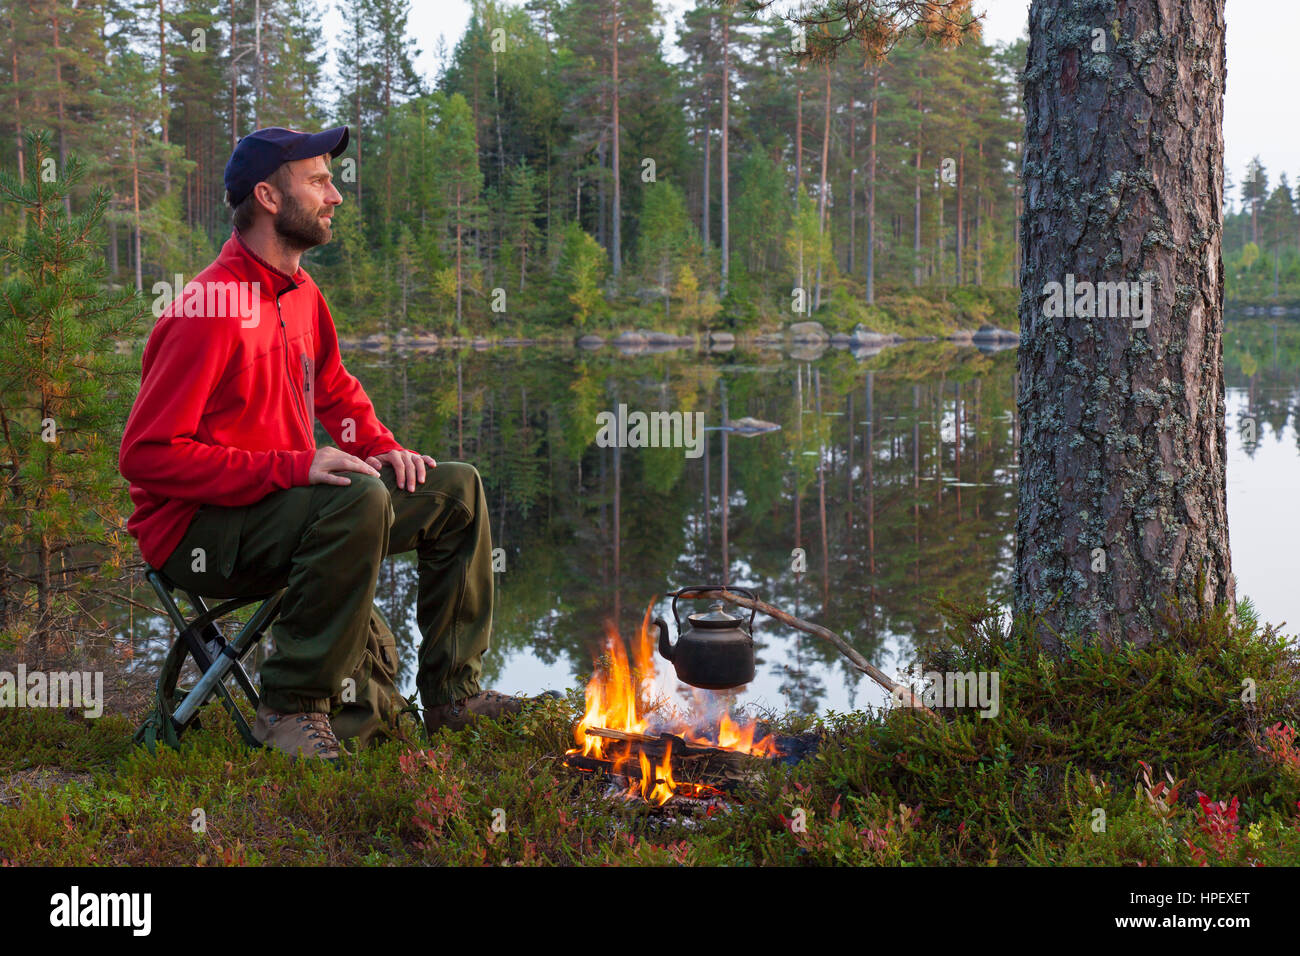 Hiker boiling water in tin kettle over camp fire while camping along lake Stock Photo